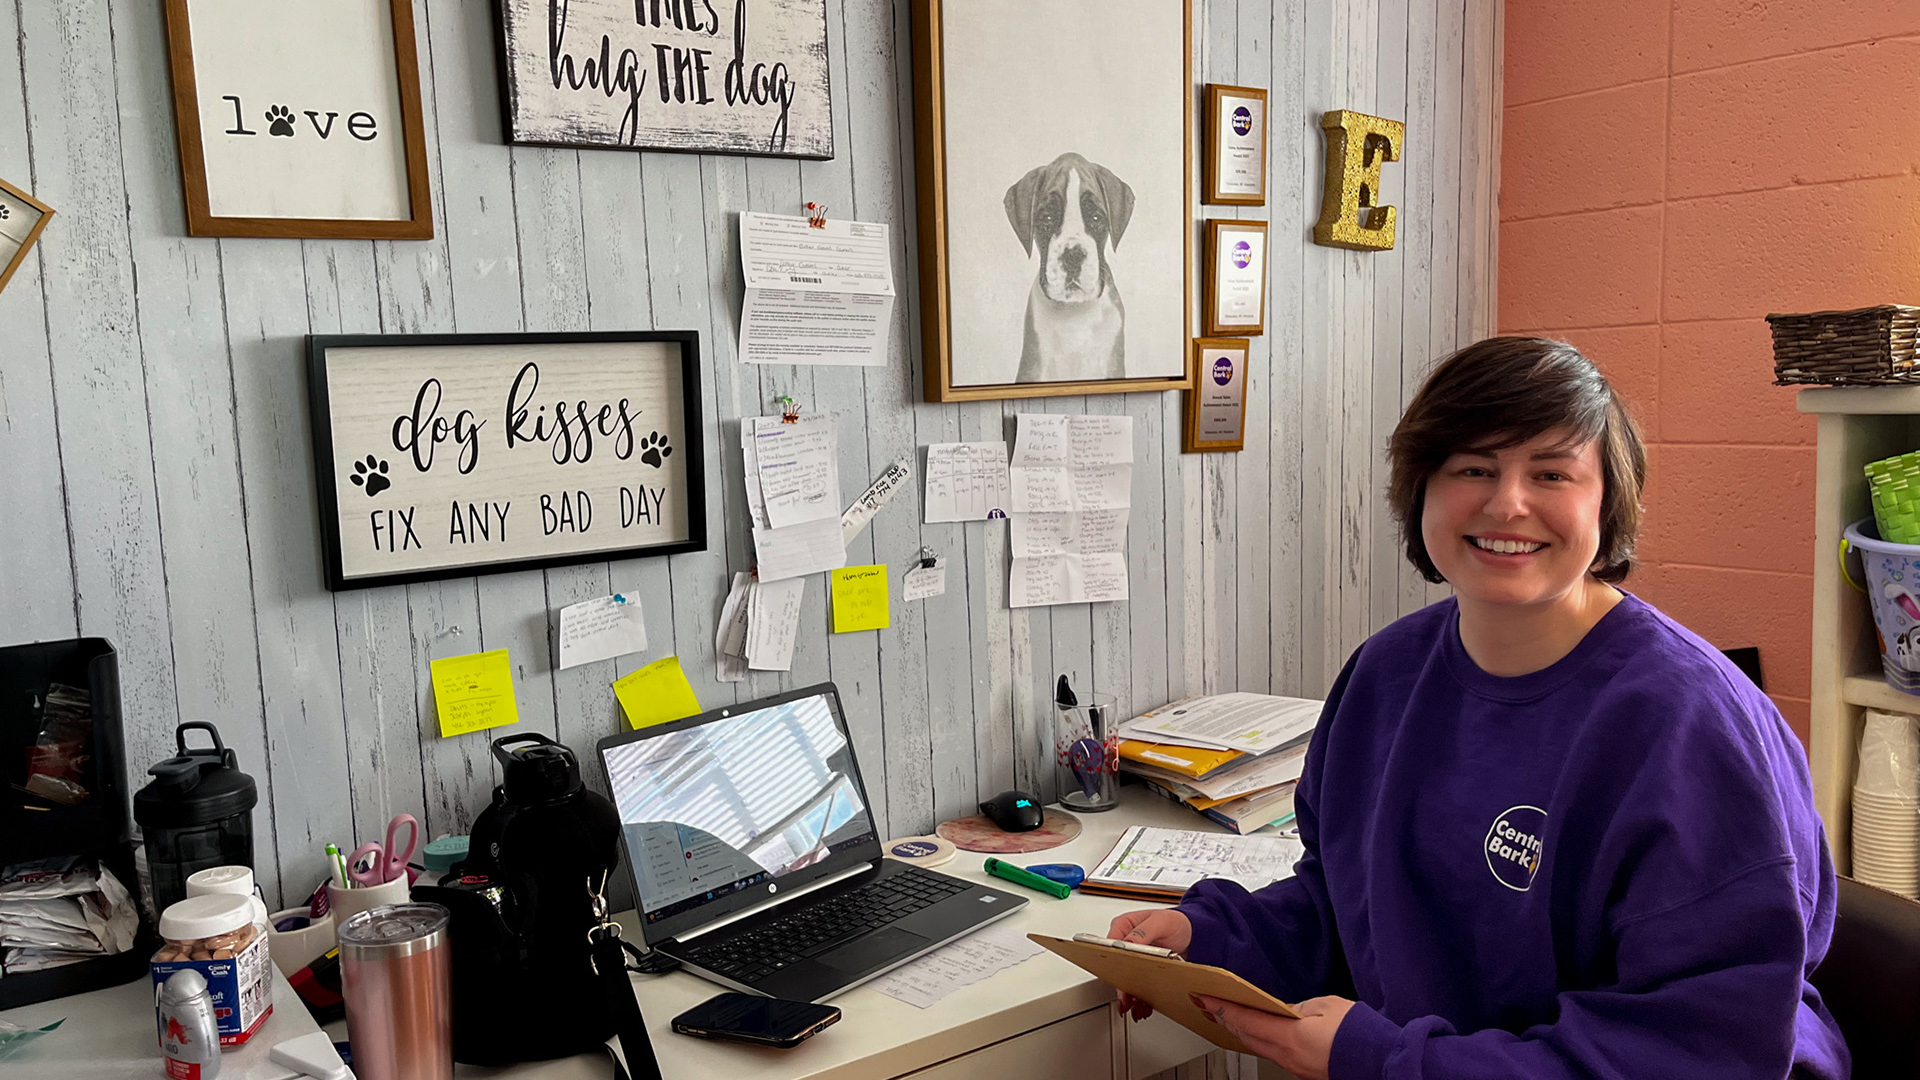 Esther Grams poses for a photo while sitting at a desk with a laptop computer, stacks of paper and other other items, with dog-themed art, award plaques and sheets of paper attached to a painted wood-paneled wall in the background.